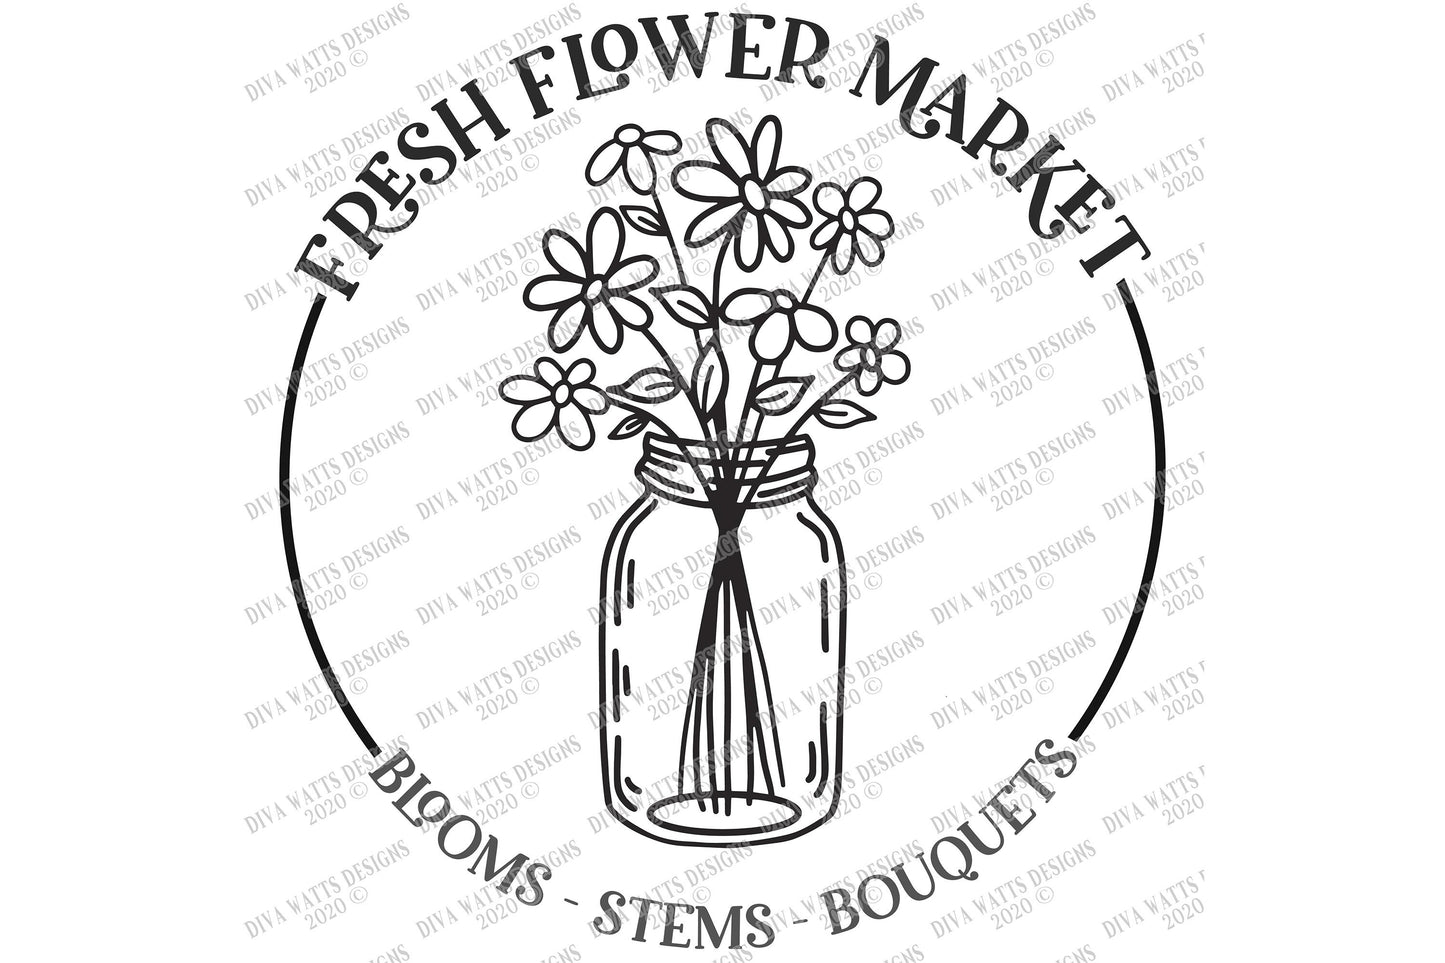 SVG | Fresh Flower Market | Cutting File | Daisies Mason Jar | Blooms Stems Bouquets | Round Circle | Daisy Flowers | Farmhouse Sign | dxf